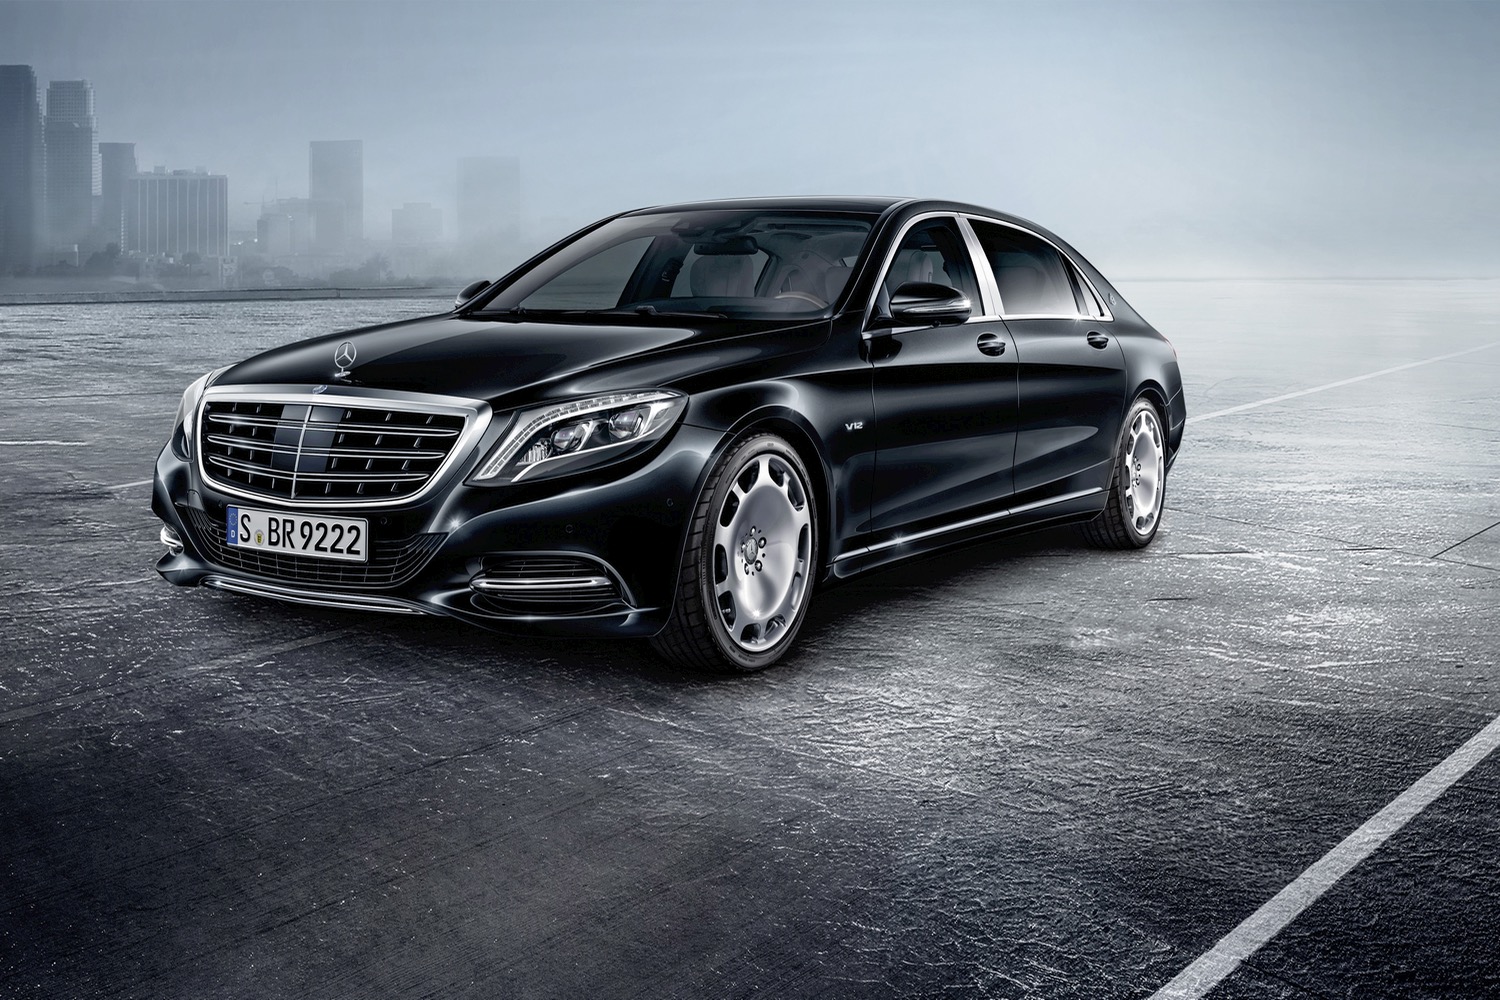 2017 Mercedes-Maybach S600 Guard Gets You Through A War Zone In Style